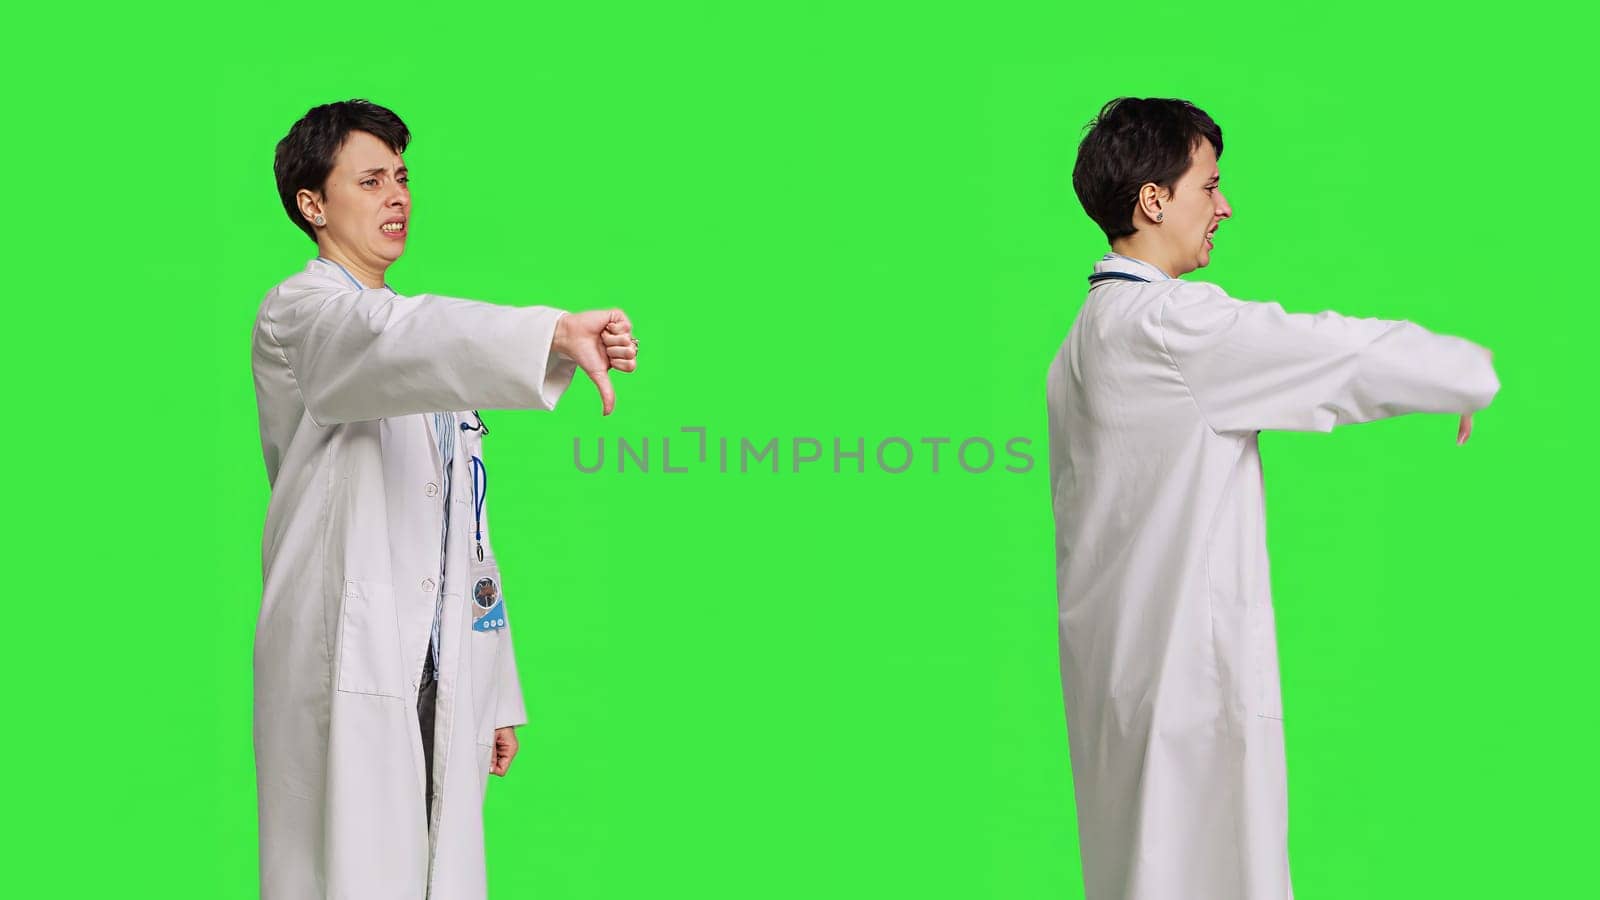 Displeased physician showing thumbs down symbol against greenscreen backdrop by DCStudio